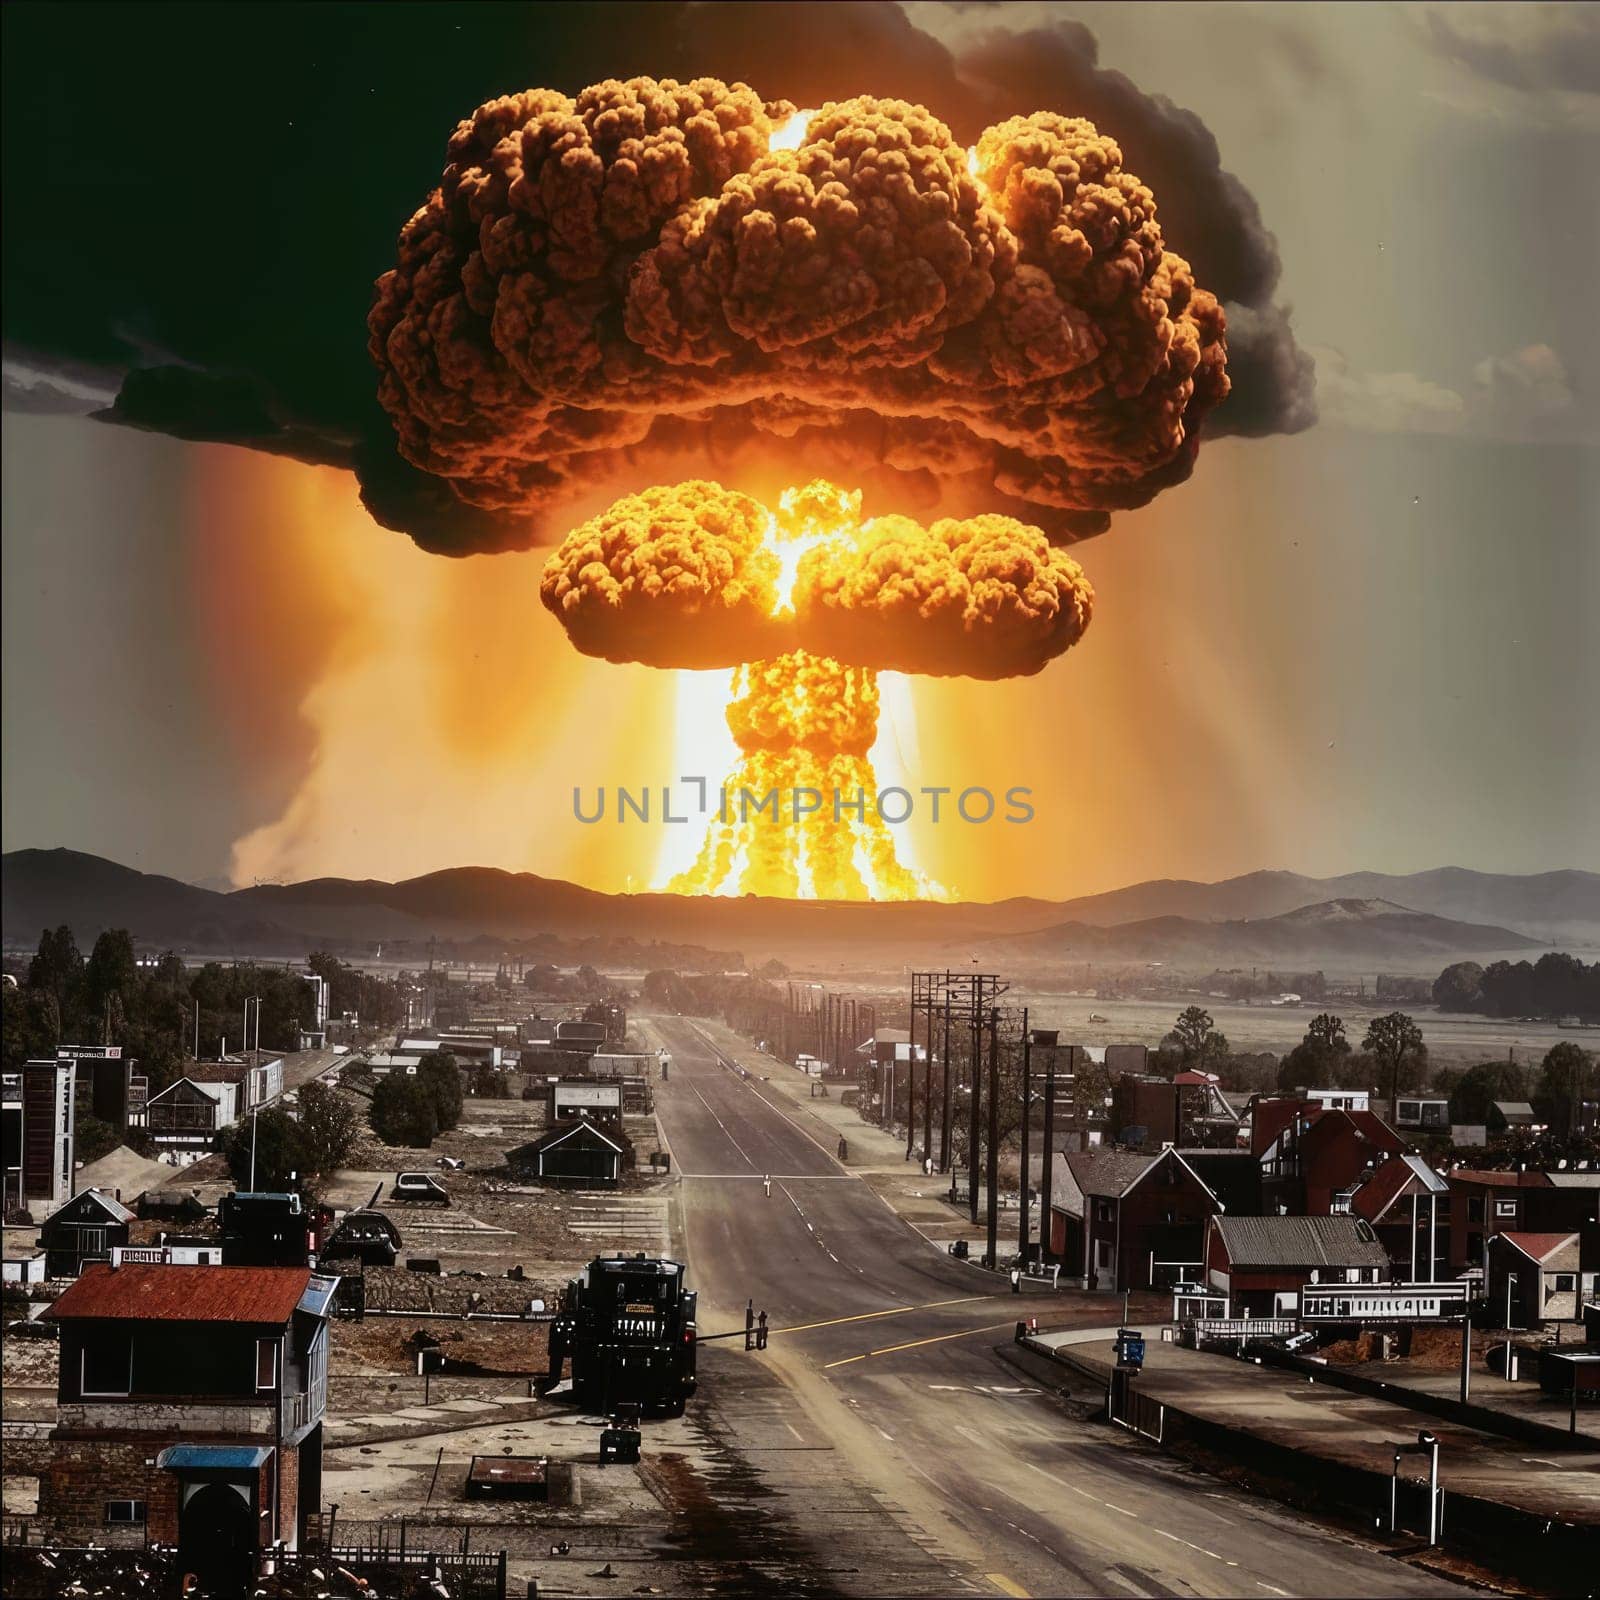 A photograph of a nuclear explosion against by kristushka_15_108